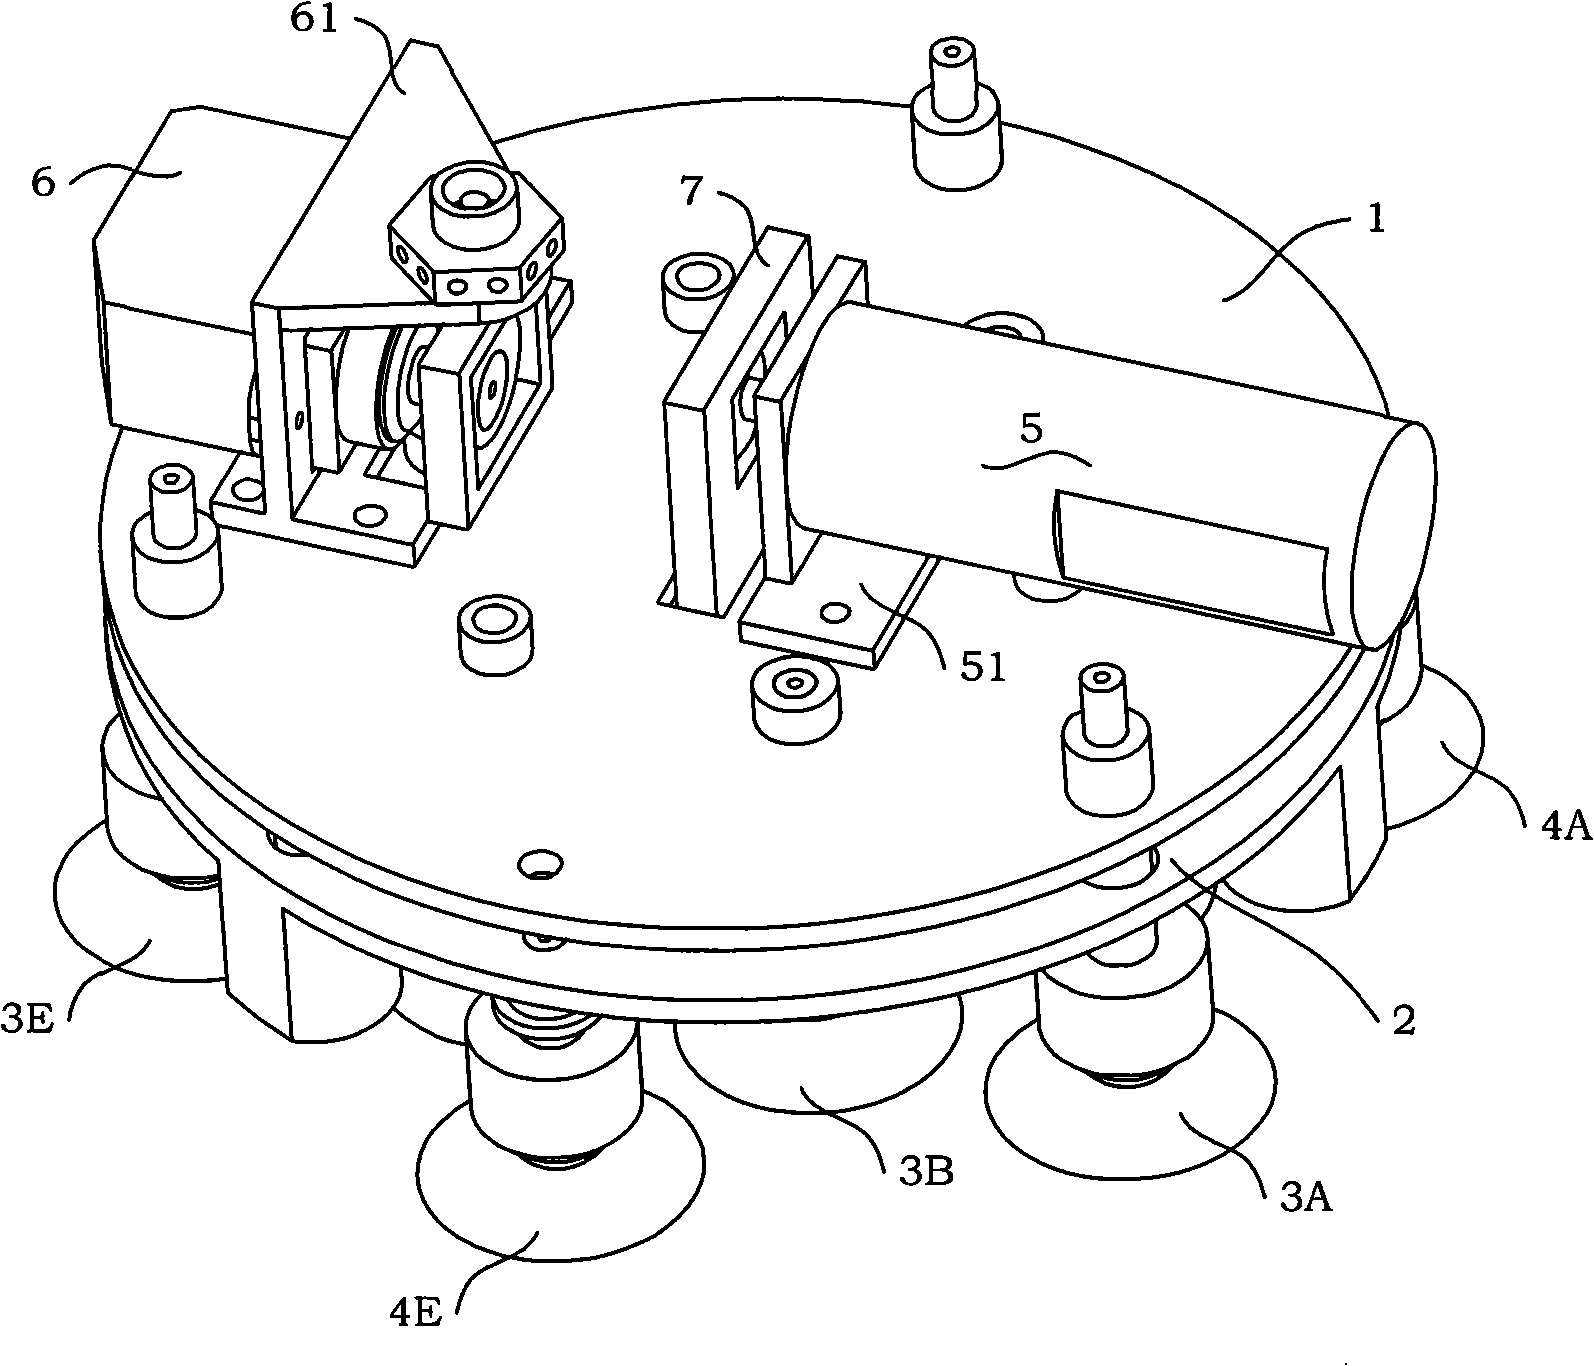 Vibration absorbing device